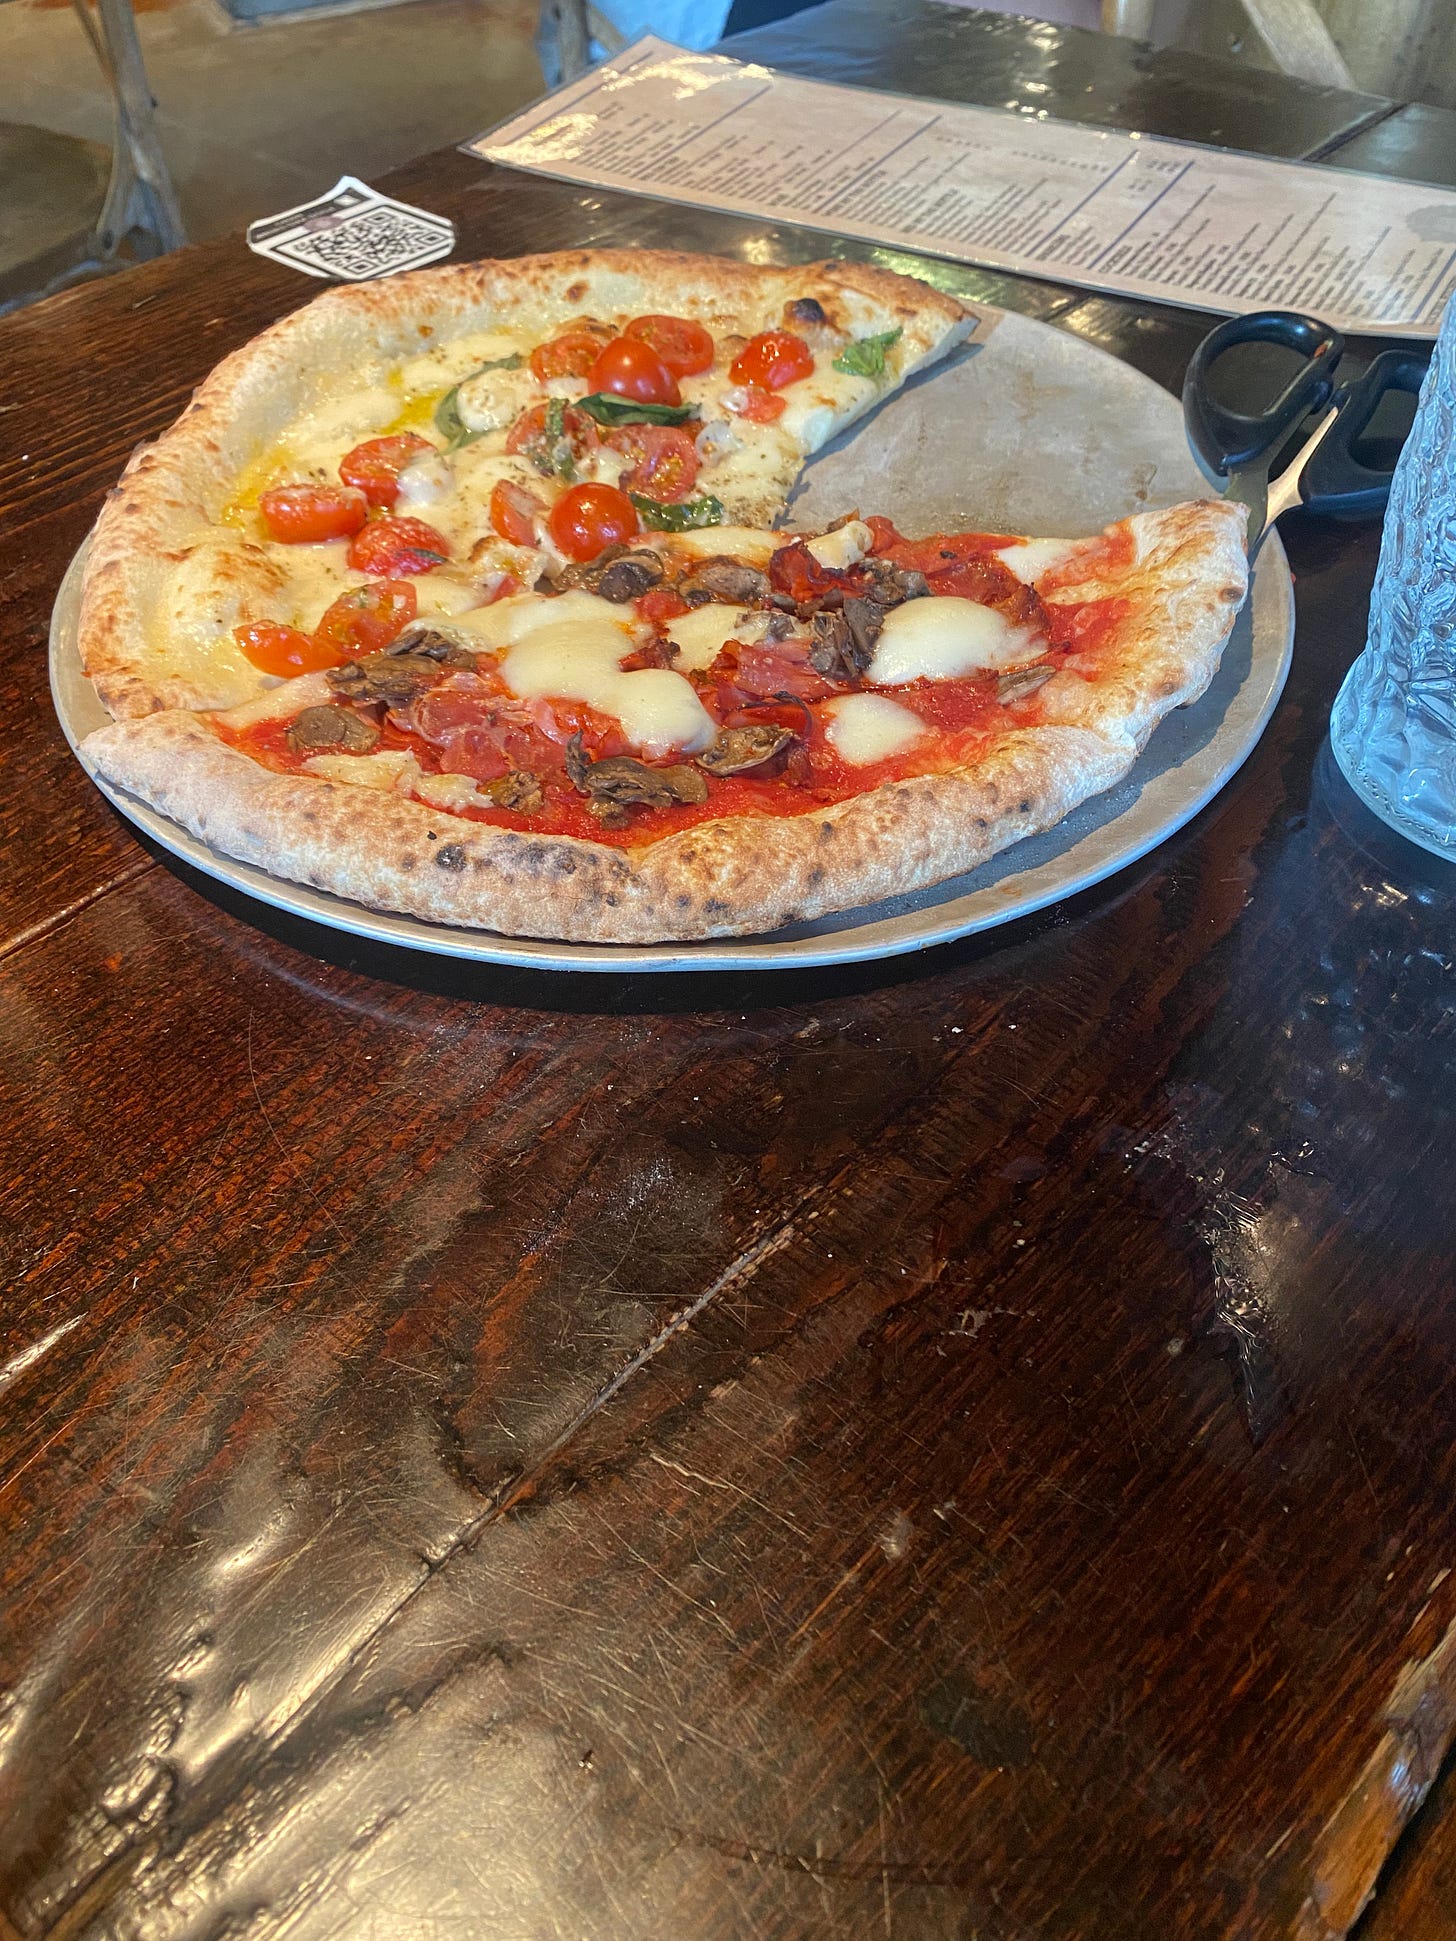 On a wooden table, a thin metal serving plate holds leftovers of two pizzas: one, a tomato base with roasted mushrooms and salami, the other, an oil base with cherry tomatoes and basil. Both have little melted dollops of fior di latte. A pair of pizza scissors are visible partially tucked under the tomato sauce pizza.